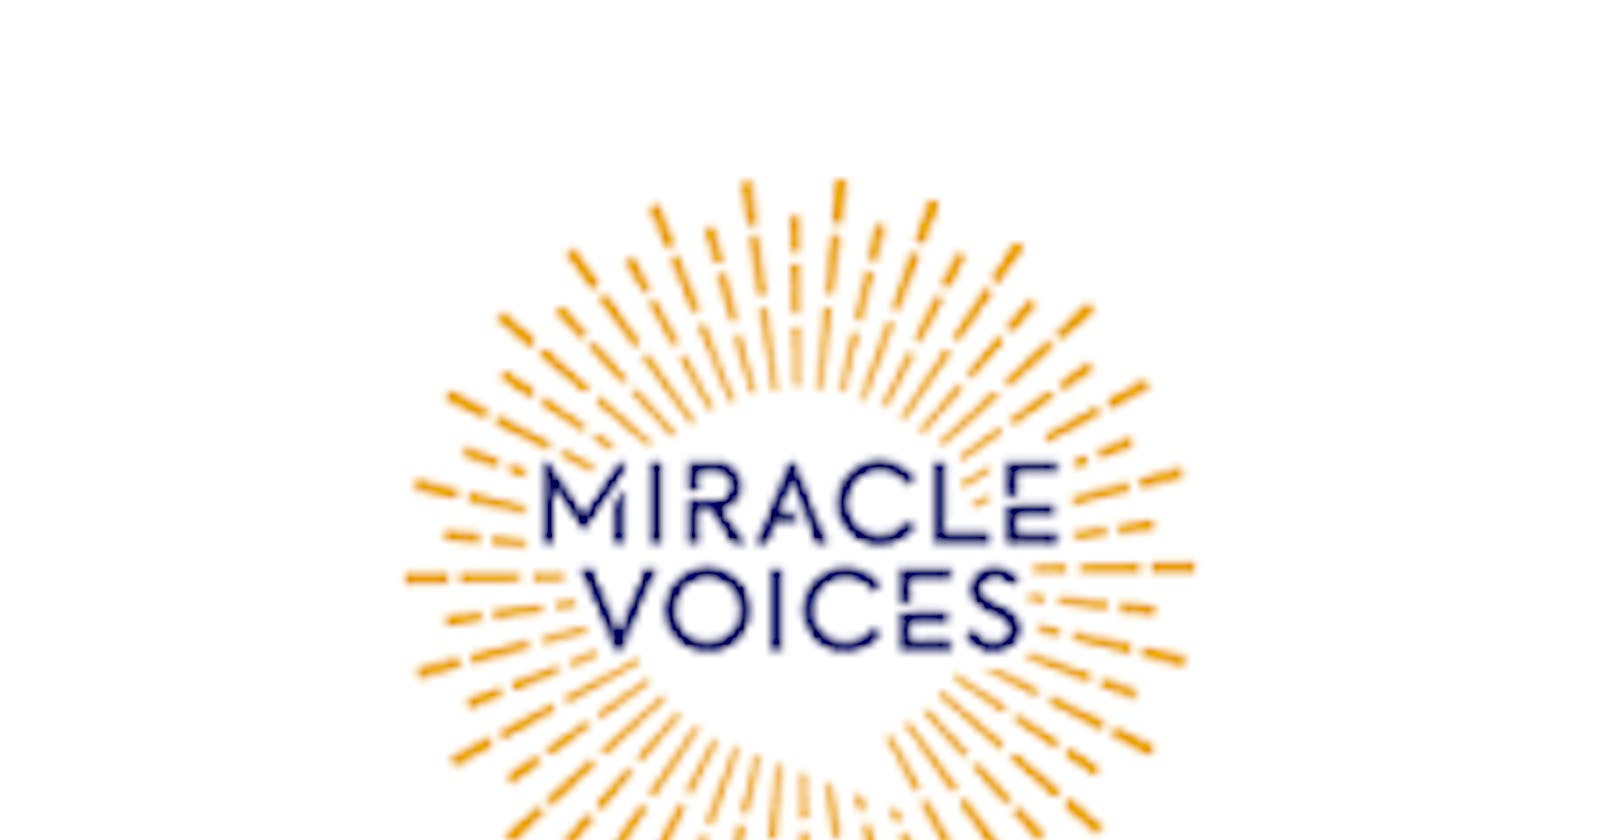 A Course in Miracles by The Foundation for Inner Peace